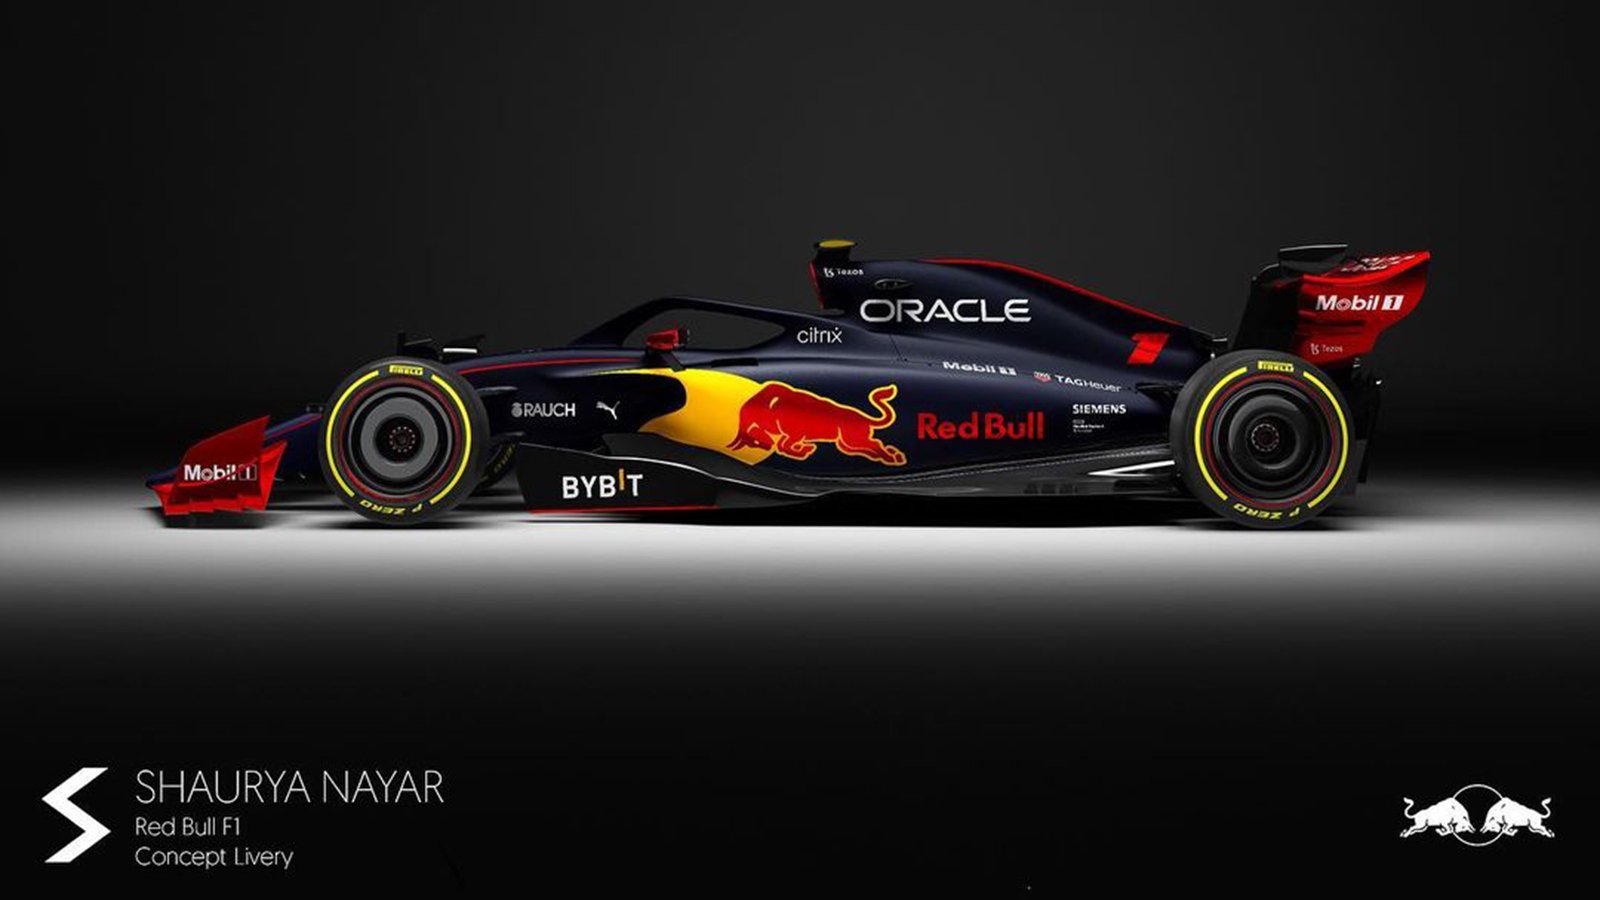 A New Look Livery And New Engine Partner As Red Bull Continue Launch Season?